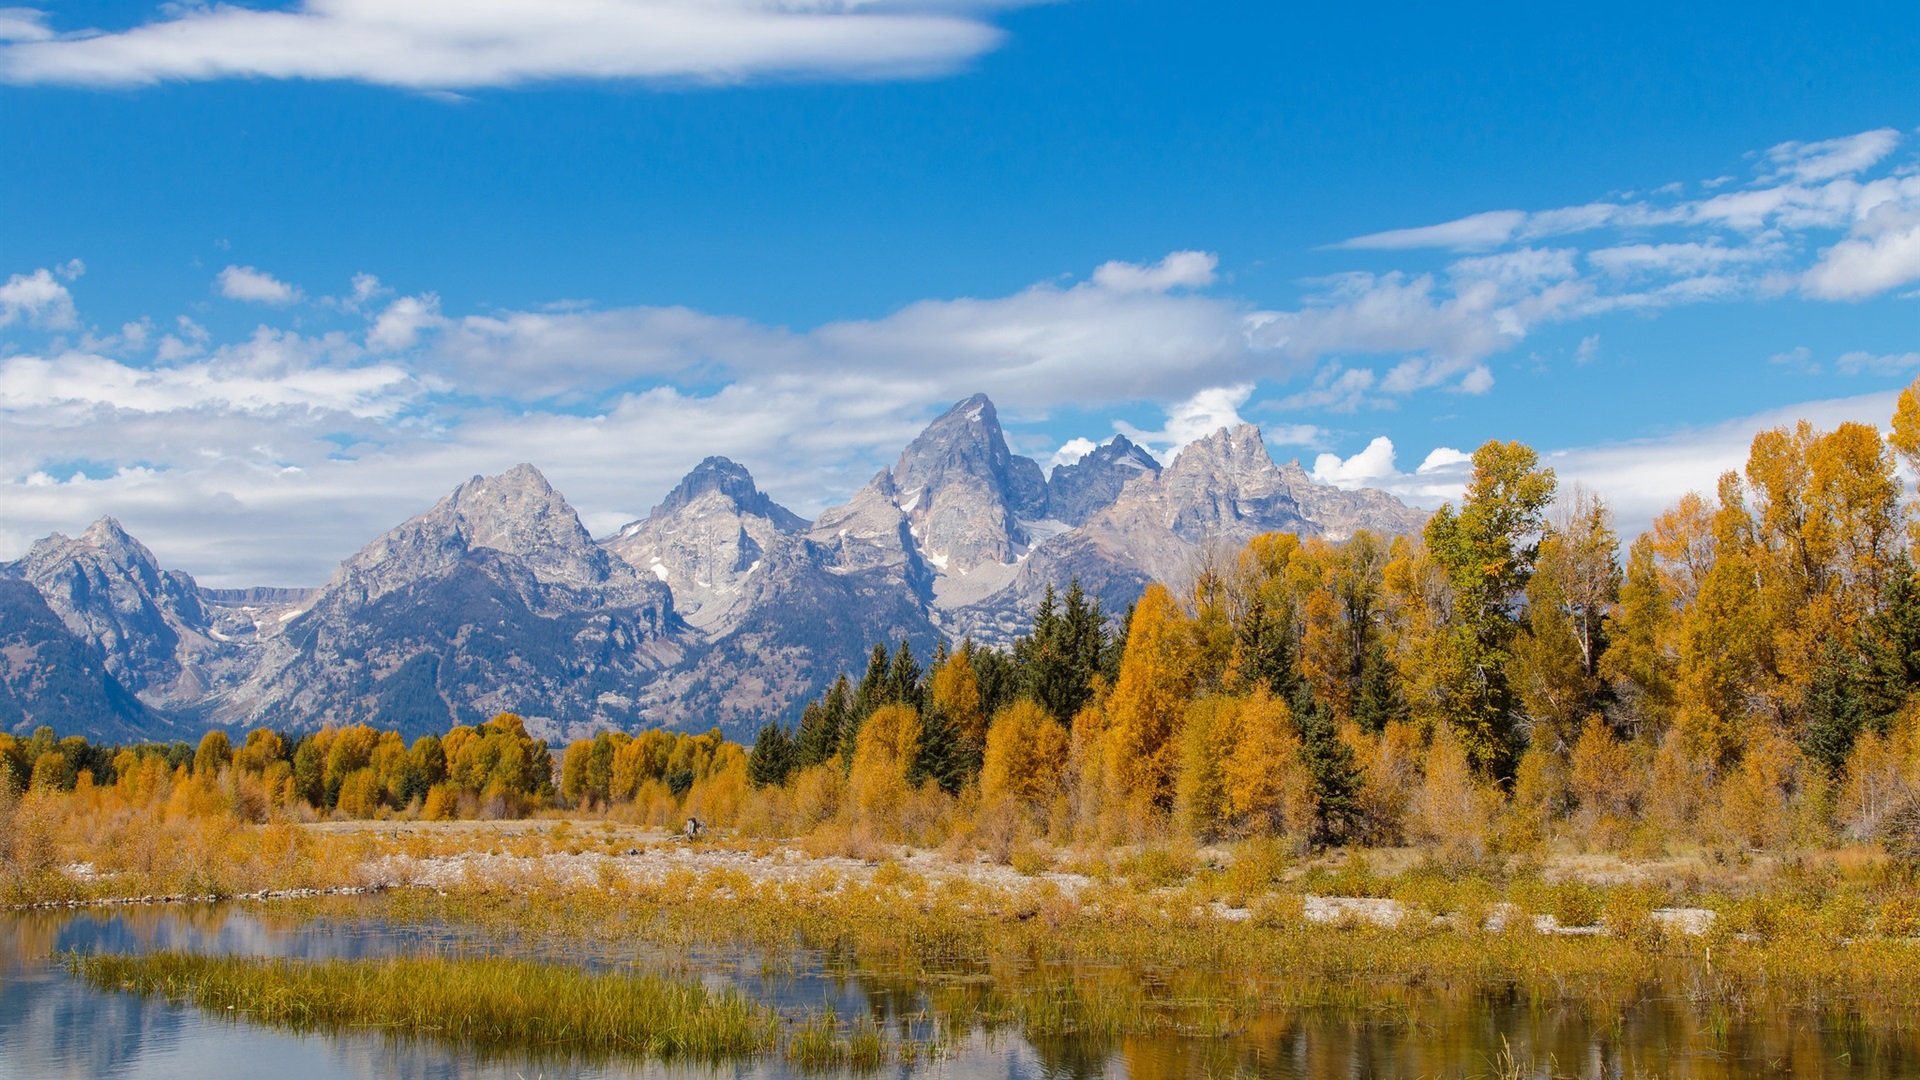 General 1920x1080 USA Grand Teton National Park Wyoming mountains forest rocks clouds sky trees fall plants river nature landscape photography